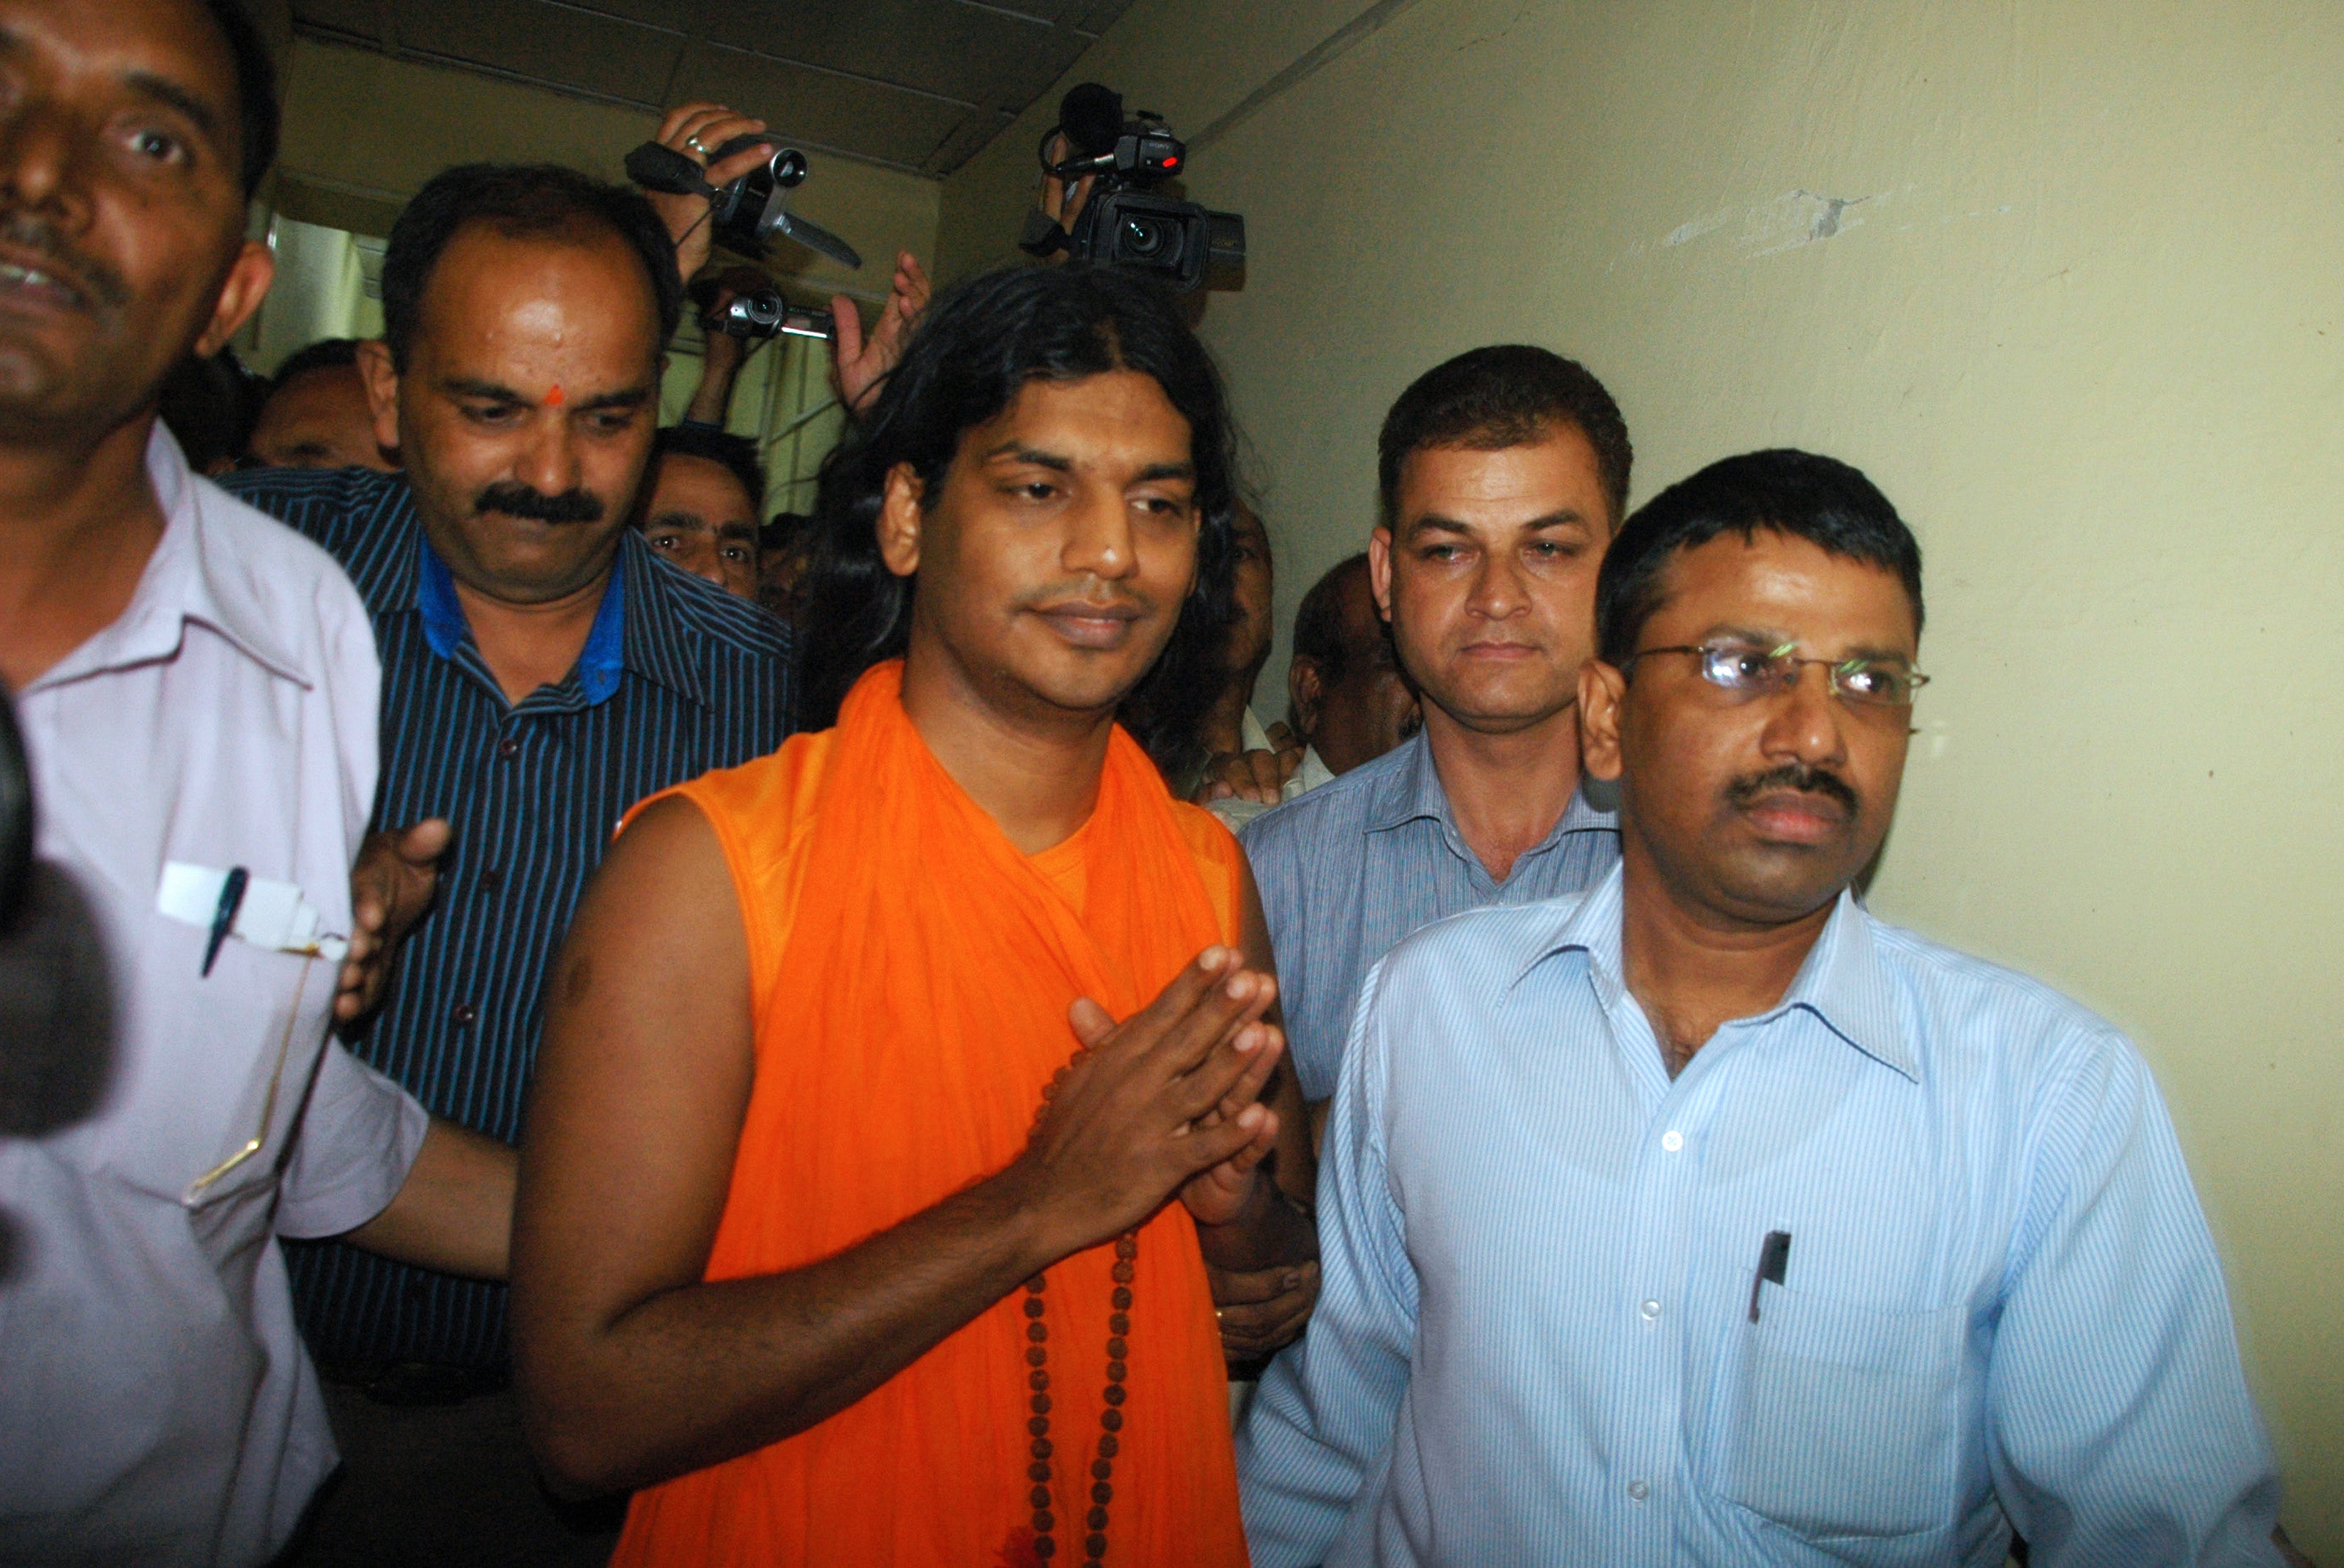 Accused godman Nithyananda, who once had thousands of followers that included film stars and politicians in India and abroad, was arrested in 2010 over a sex scandal